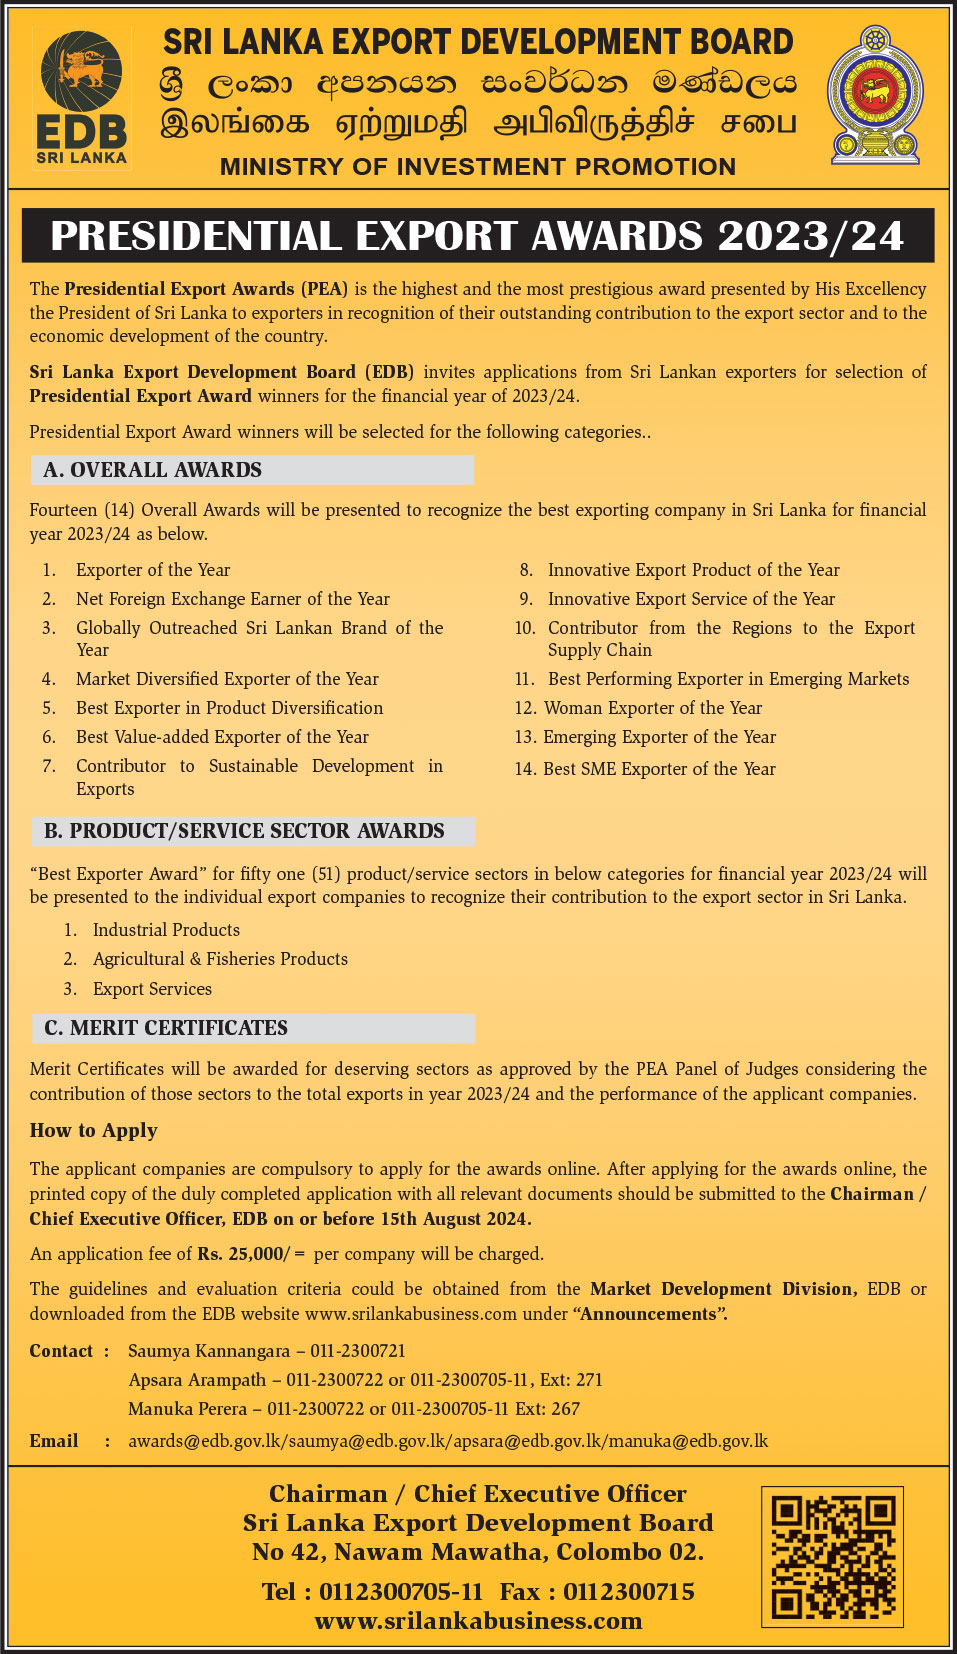 Calling Applications for Presidential Export Awards 2023/2024